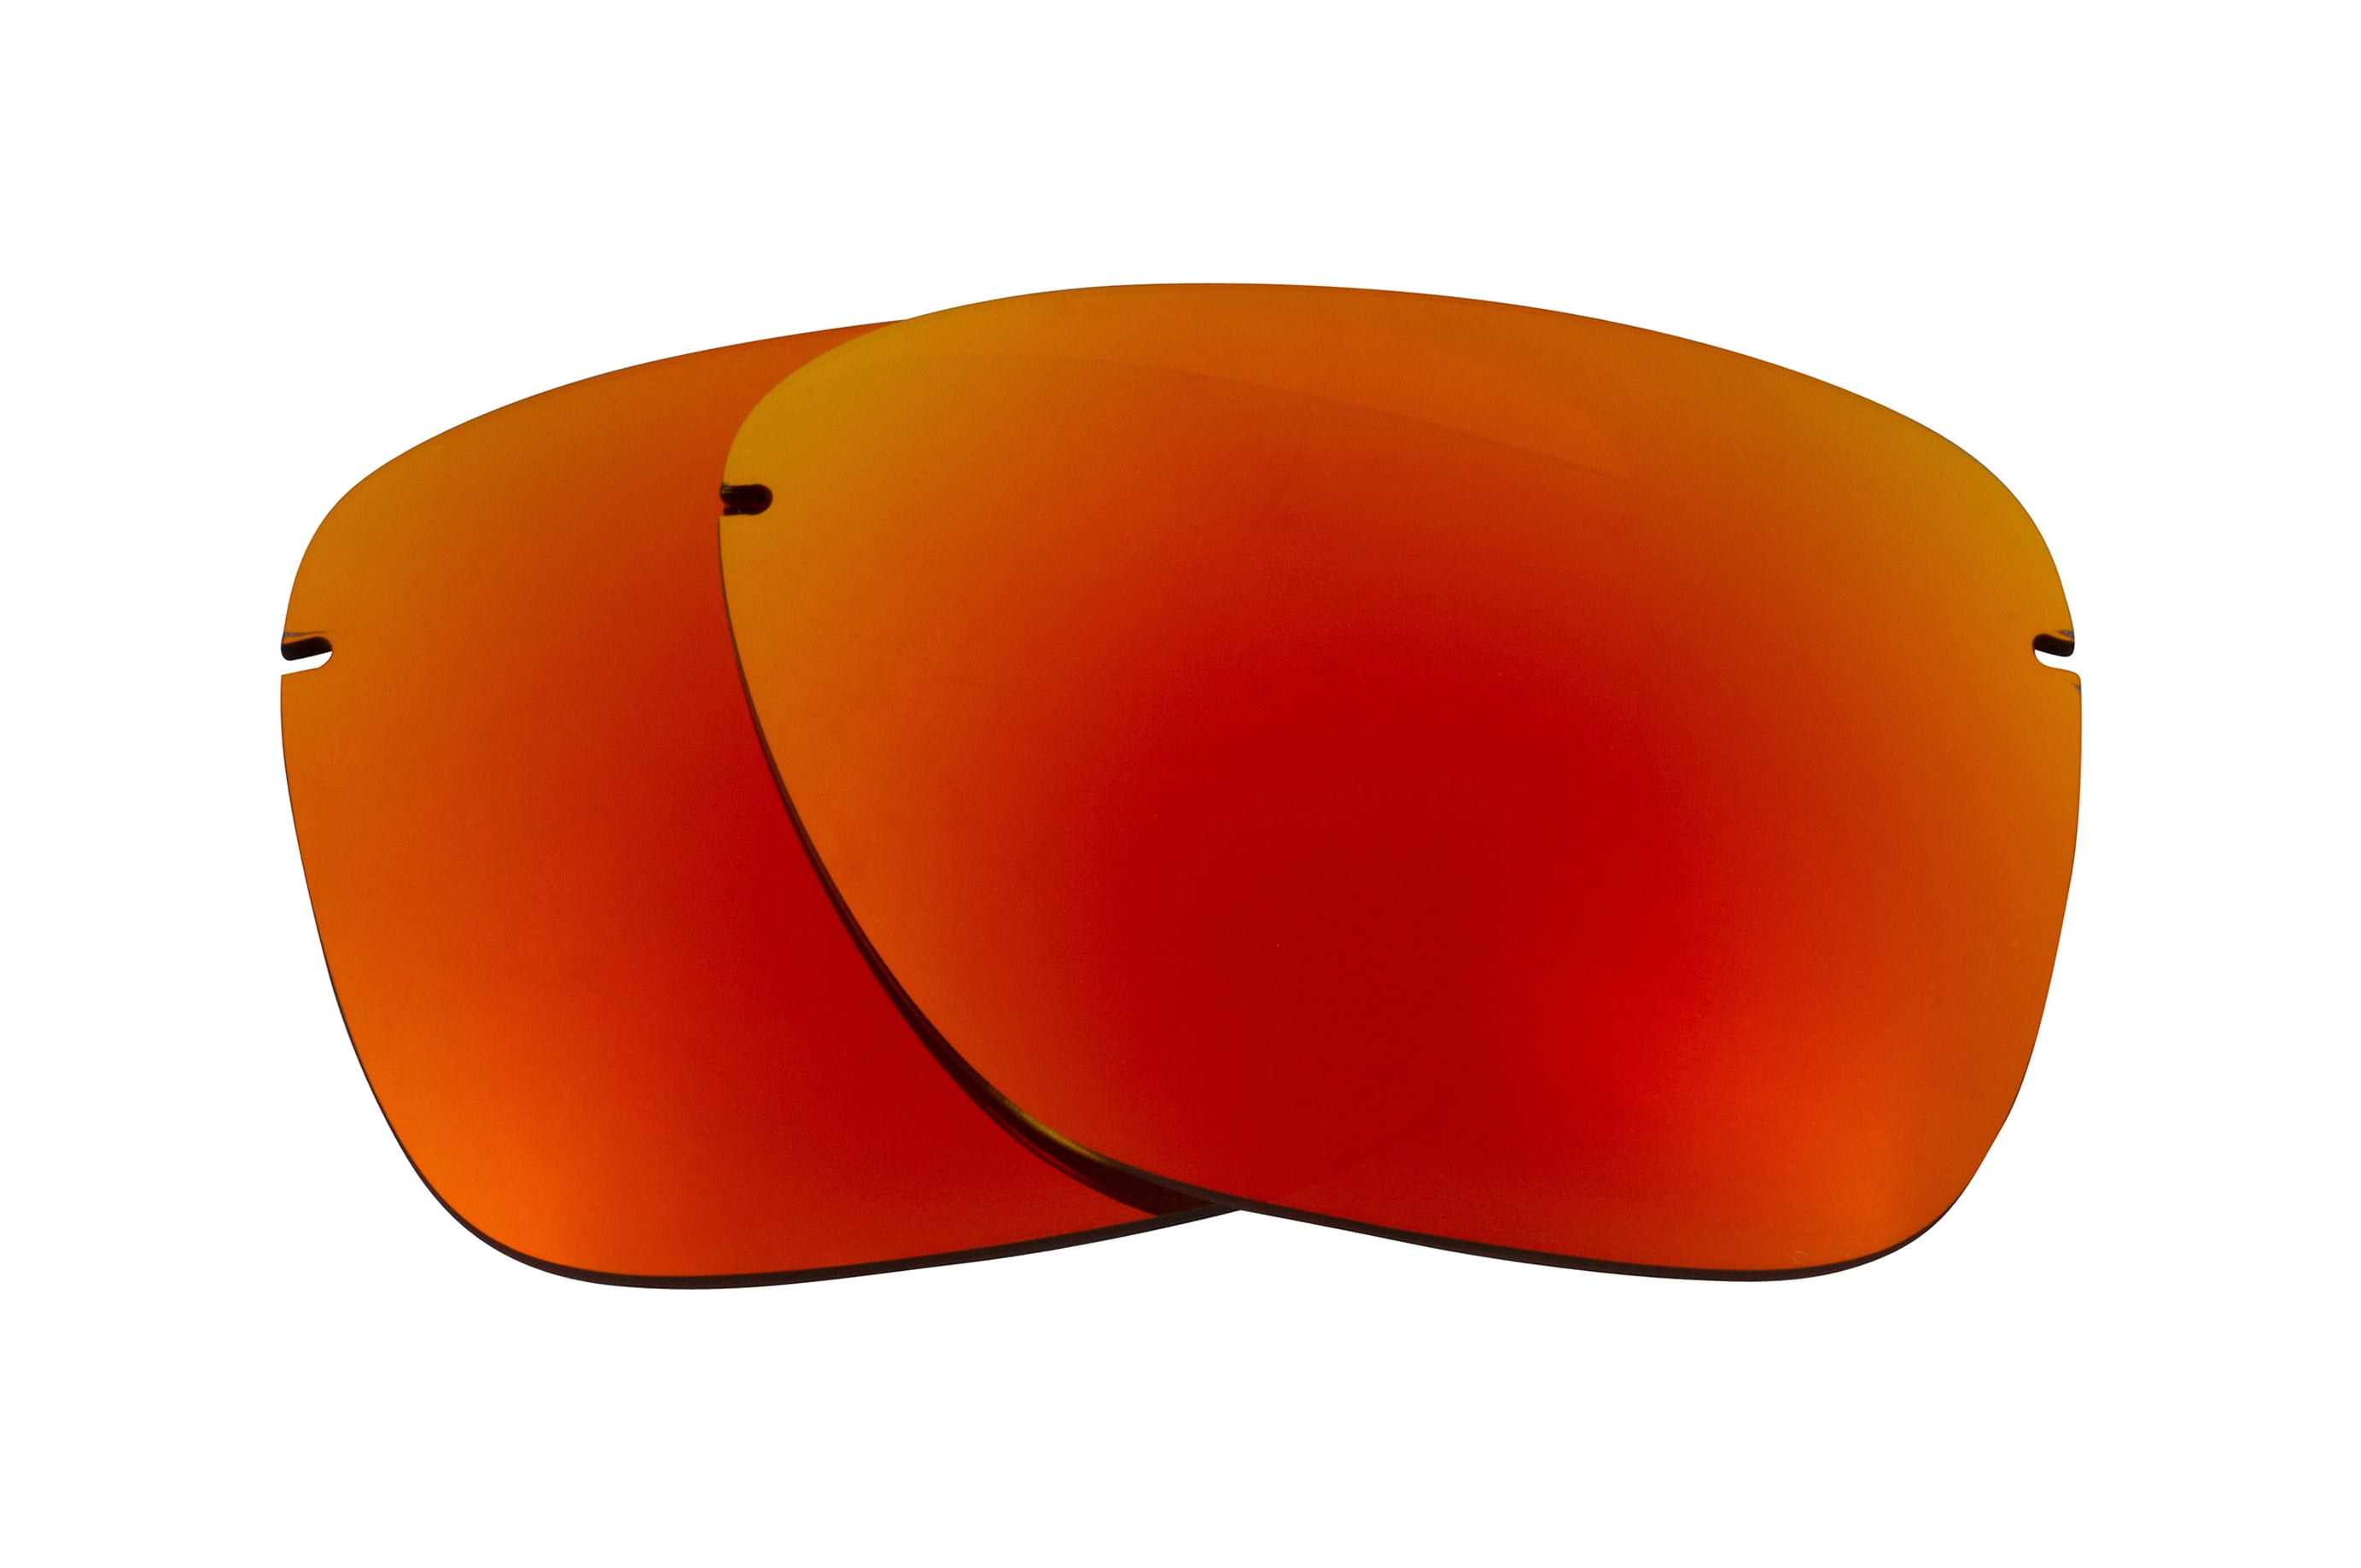 oakley tailhook replacement lenses